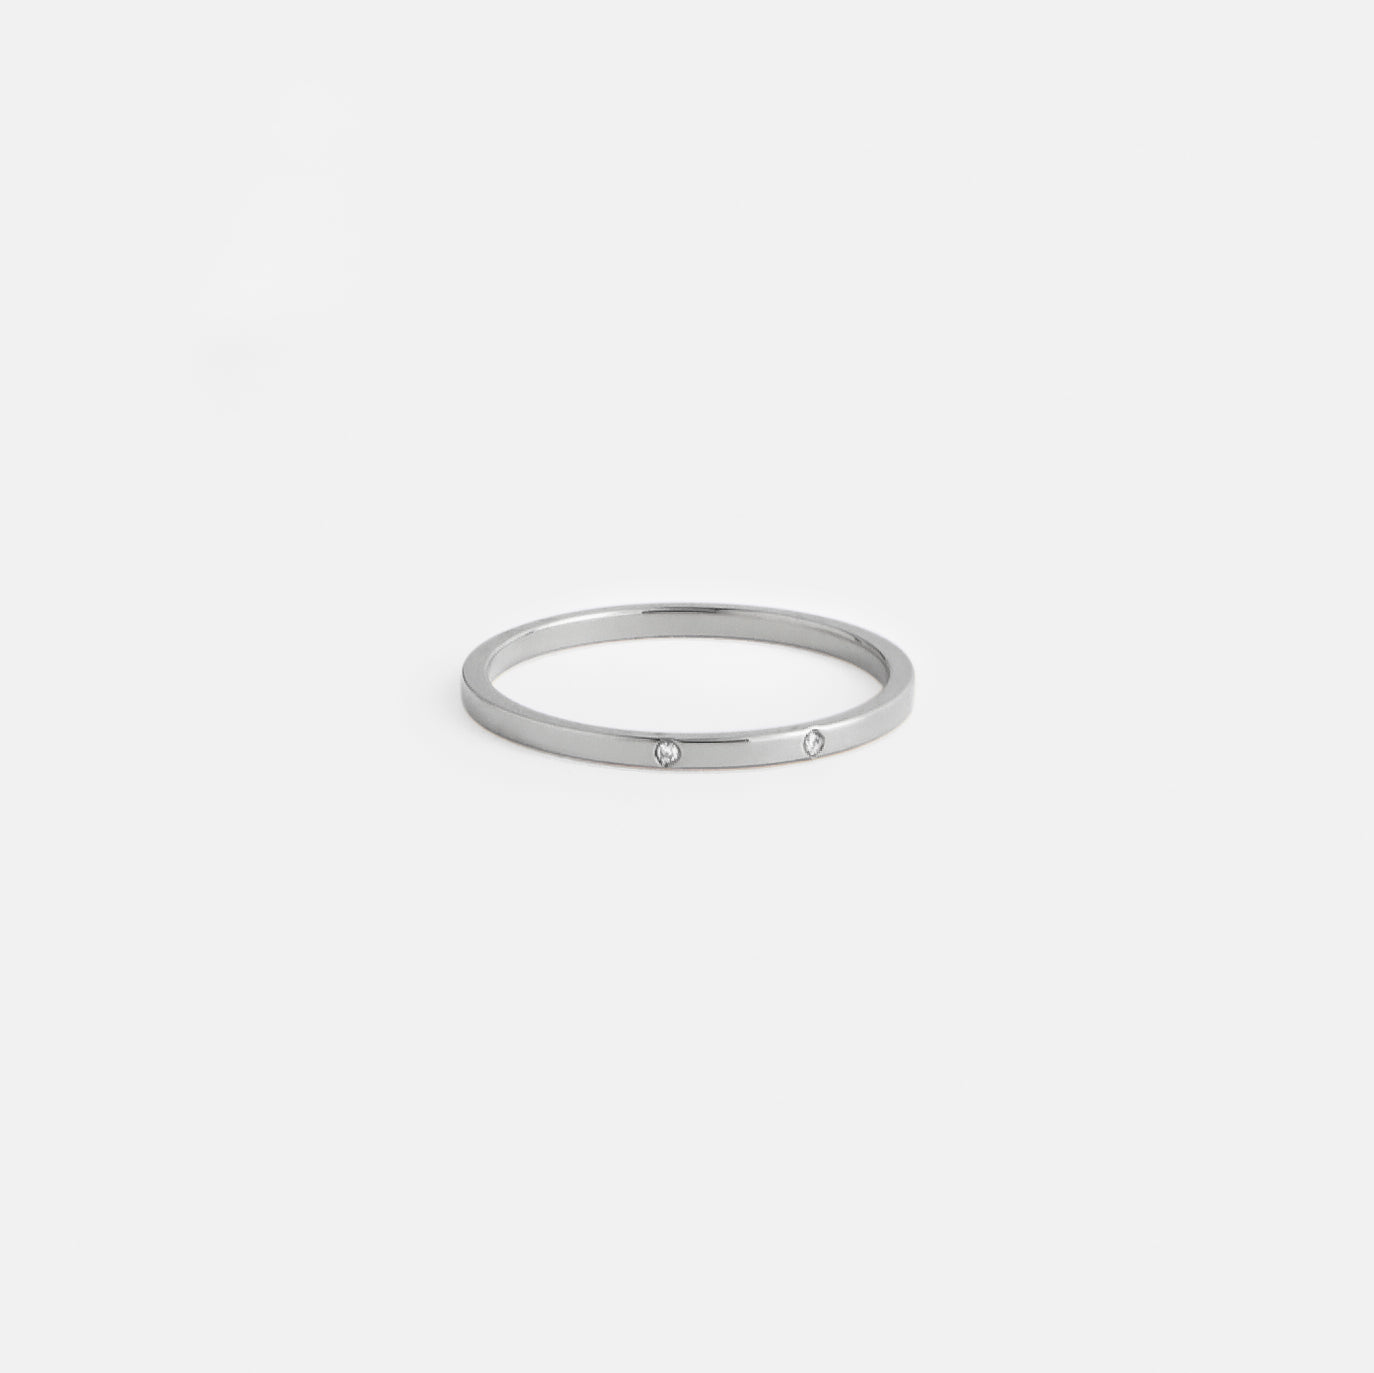 Sarala Handmade Ring in 14k White Gold set with White Diamonds By SHW Fine Jewelry New York City